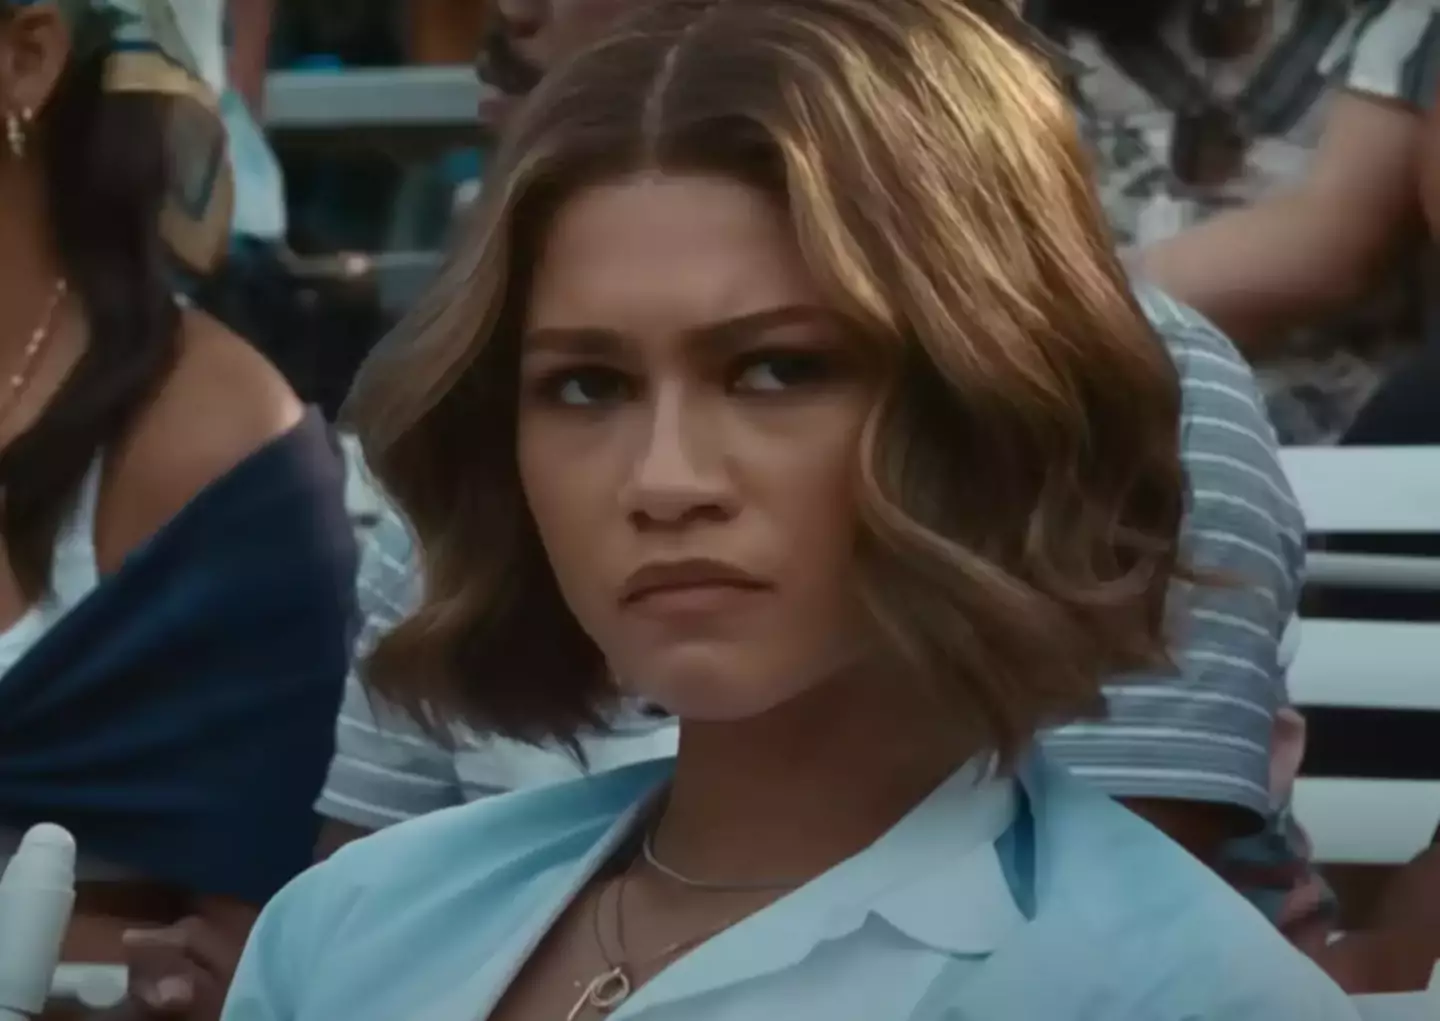 Zendaya’s upcoming film Challengers has drawn attention for its steamy nature. (MGM)